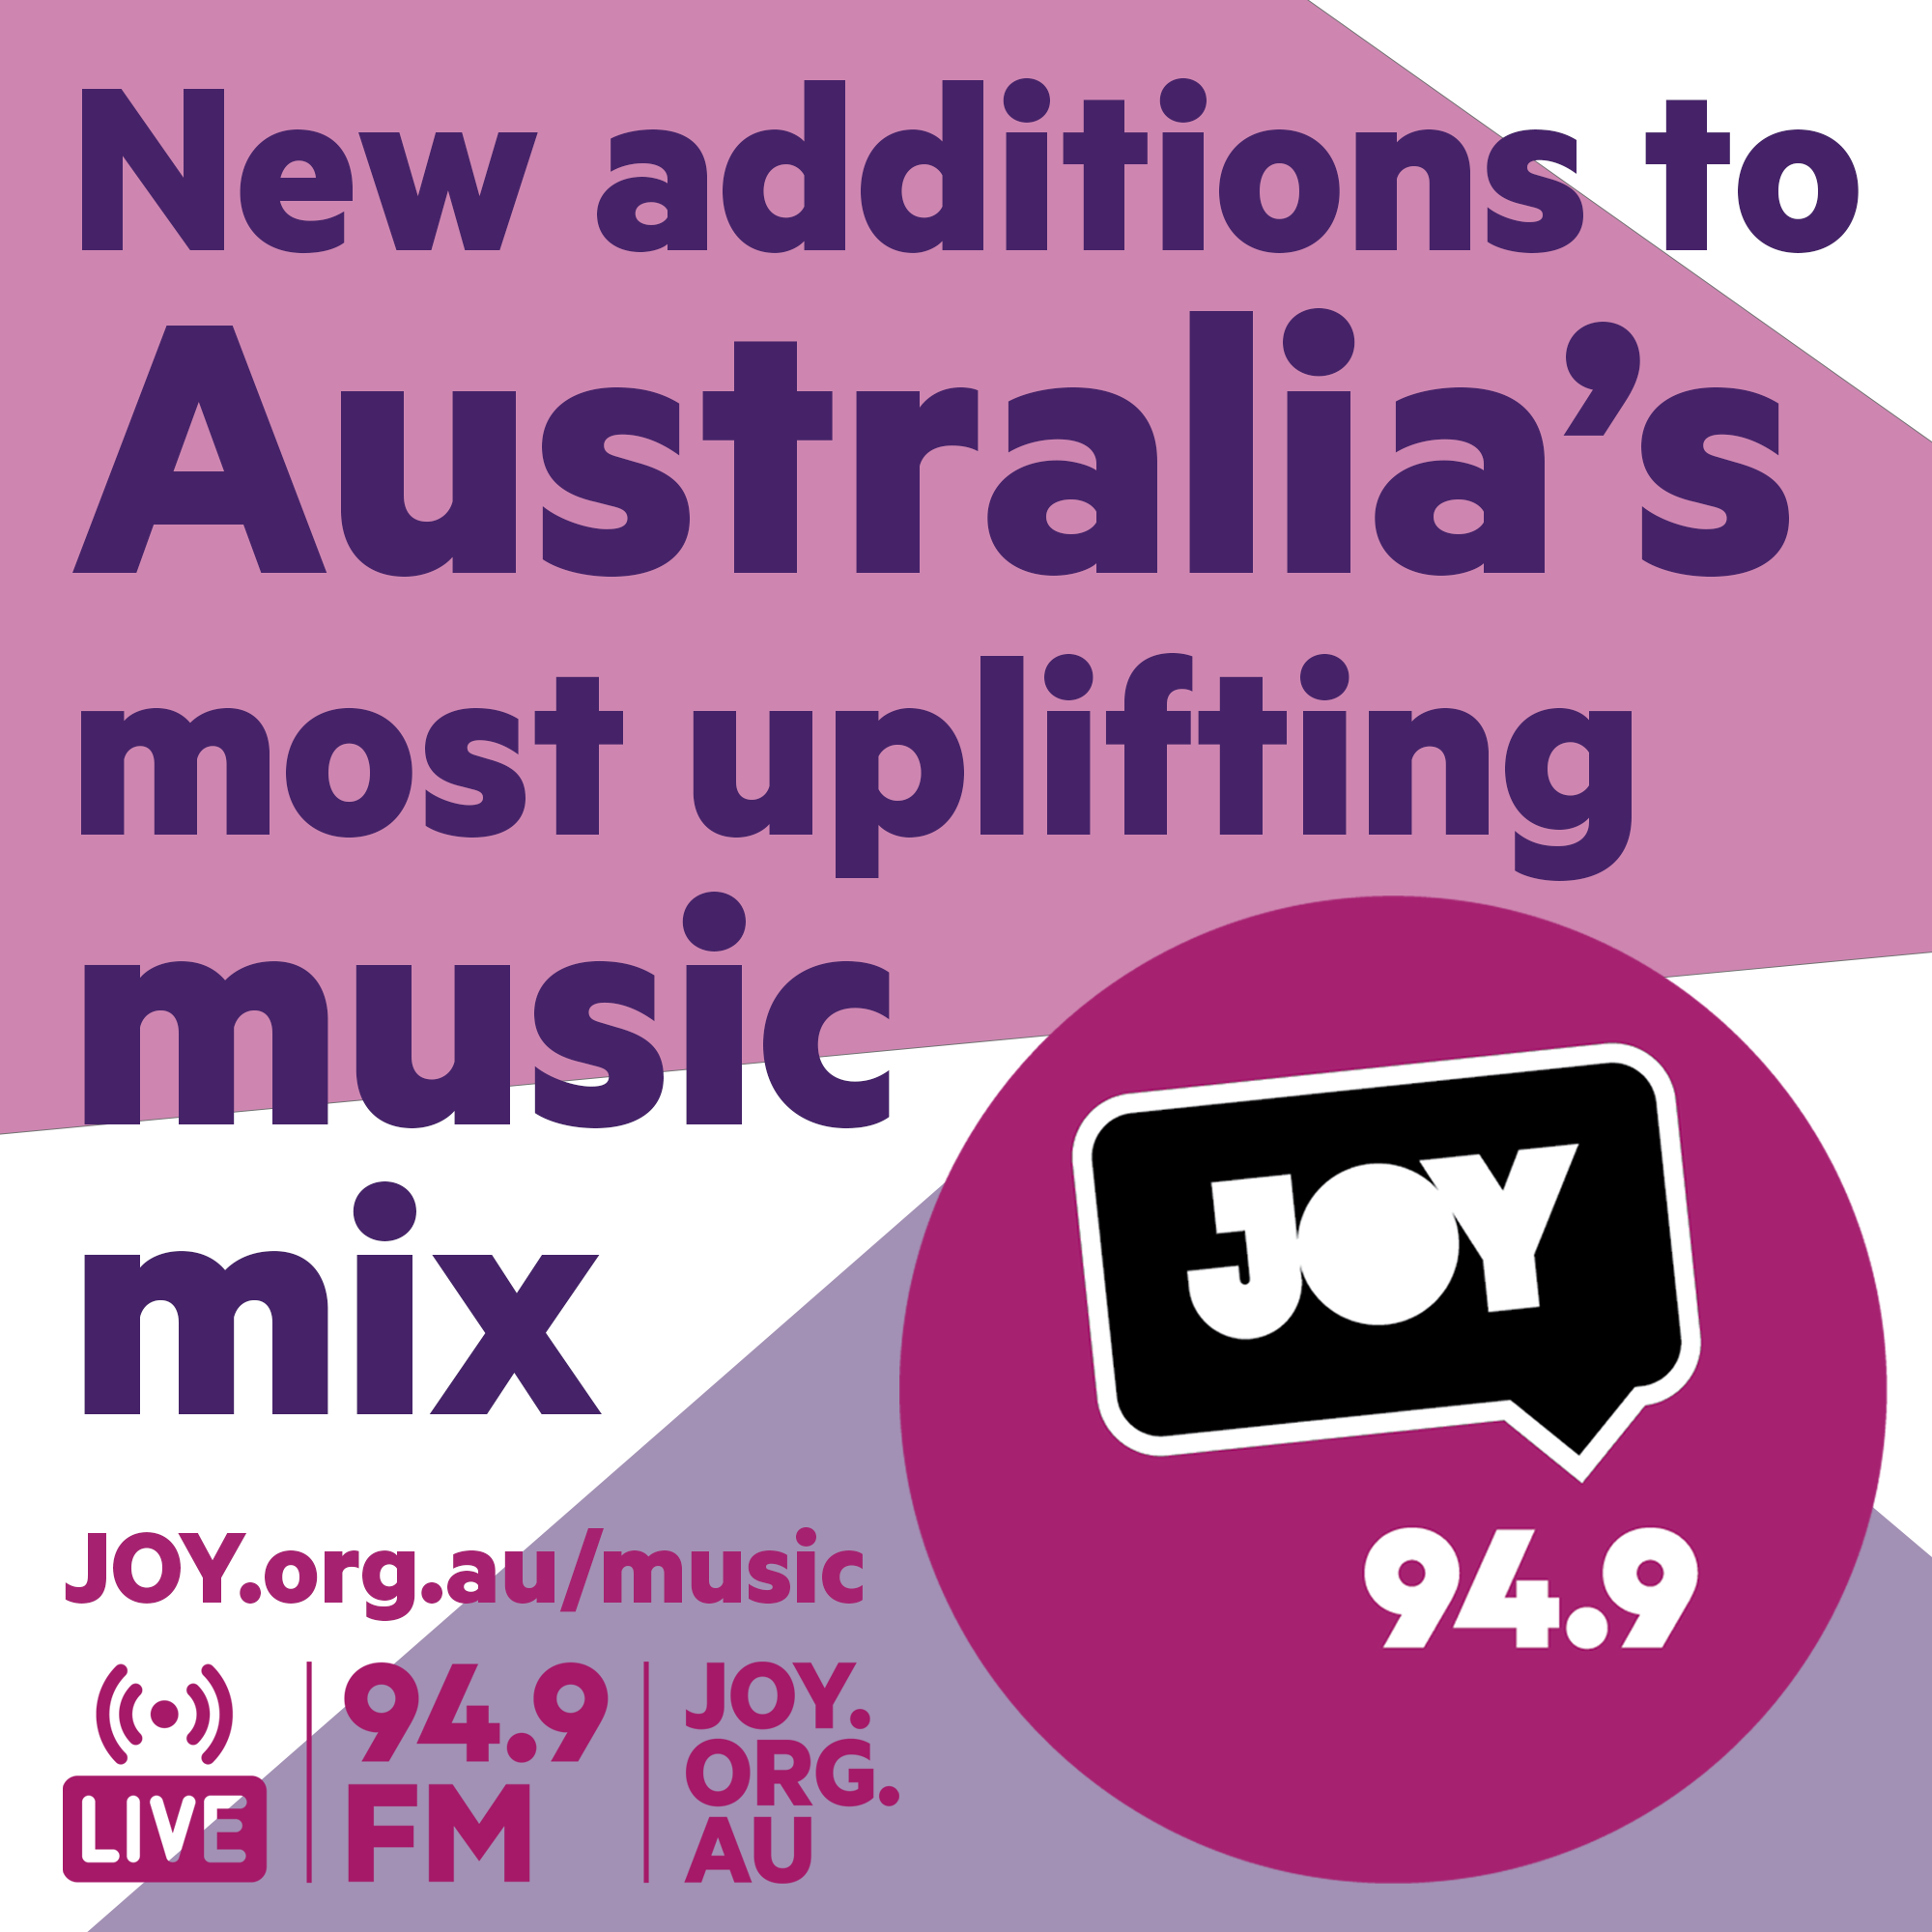 The newest songs to Australia’s most uplifting music mix: 19 January 2022